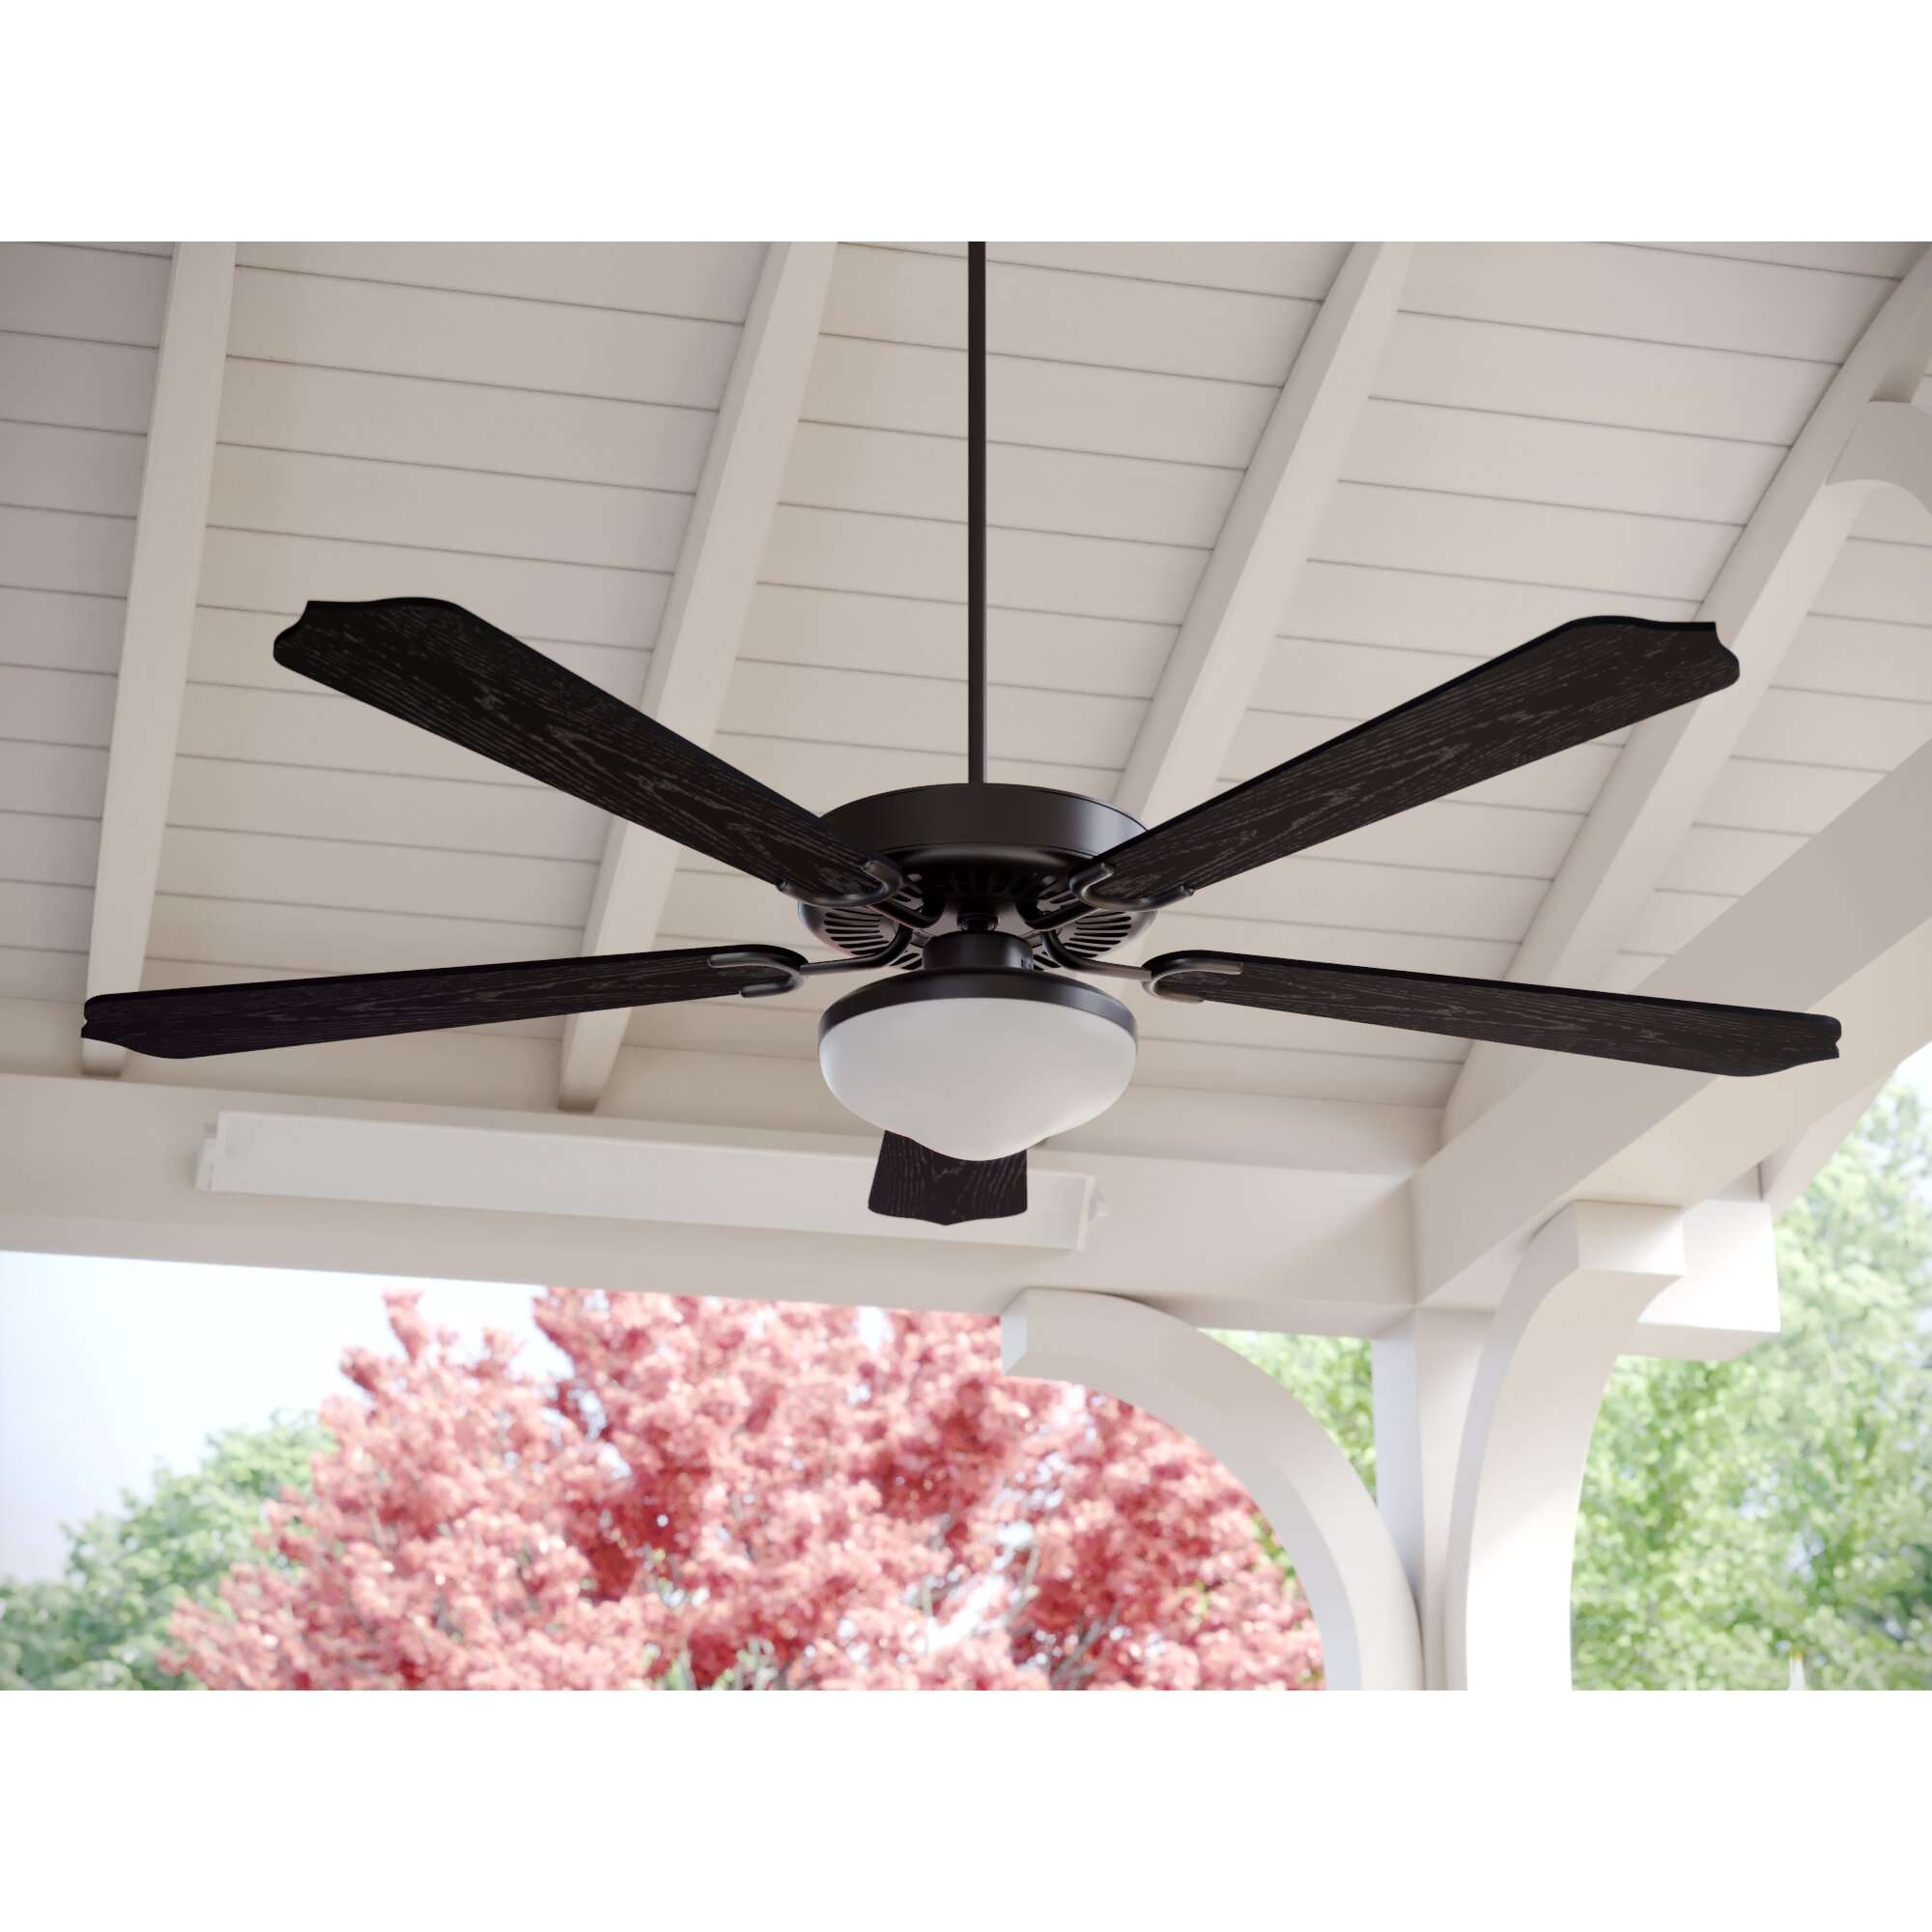 Darby Home Co 52" Sawyerville 5 Blade Outdoor Ceiling Fan ...